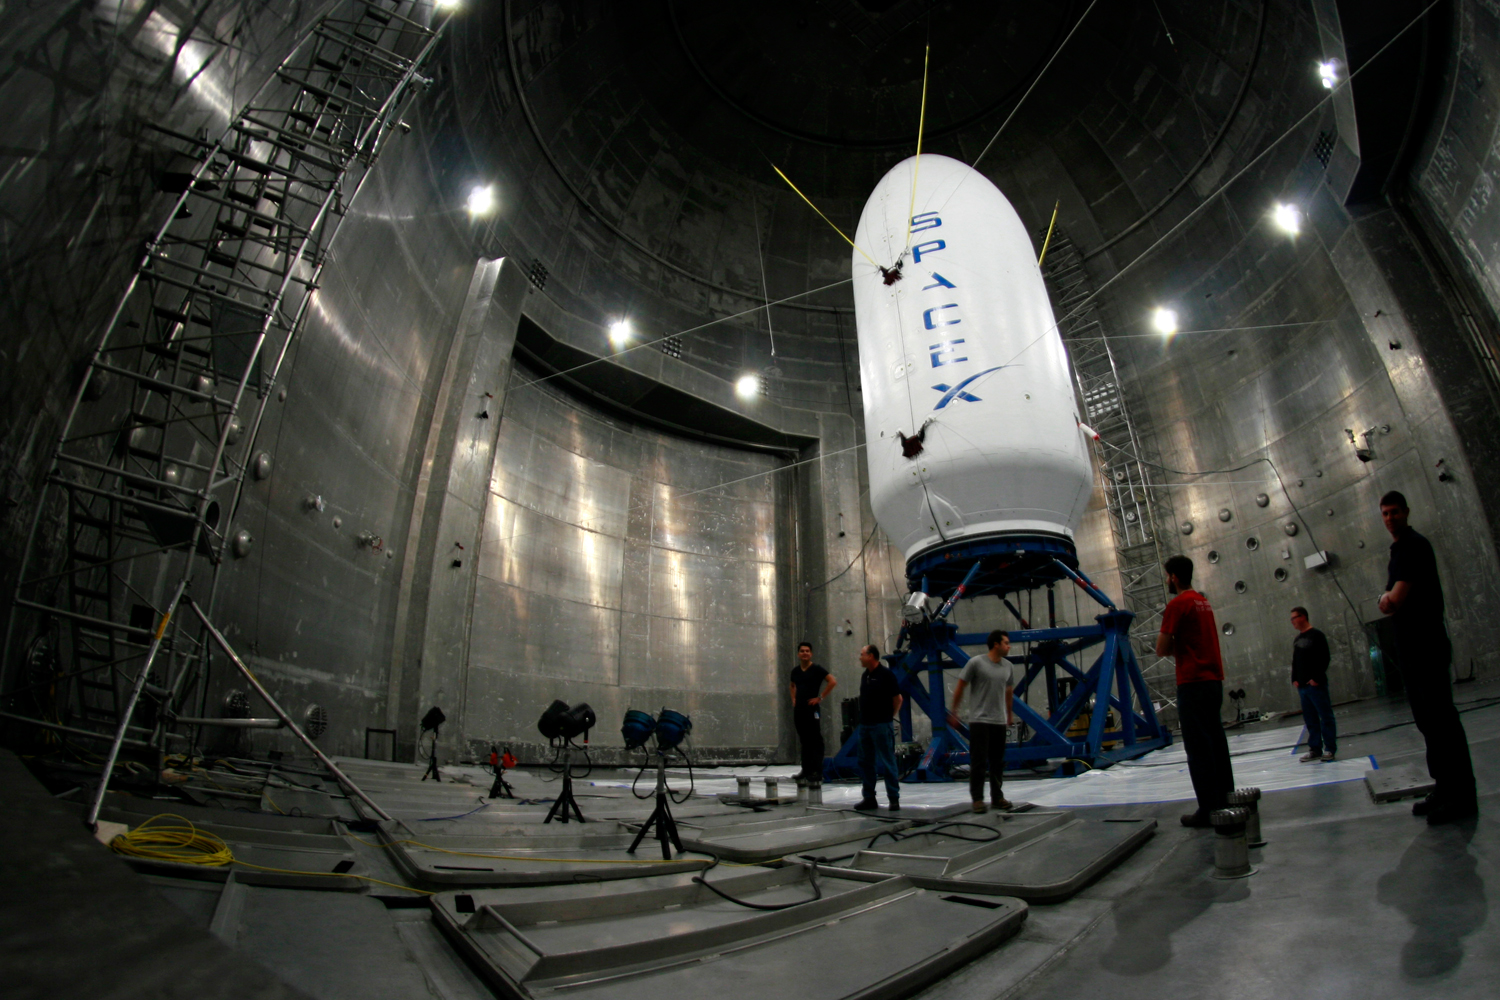 A SpaceX component preparing for testing in the world's largest vacuum chamber at NASA Glenn Research Center in Cleveland.